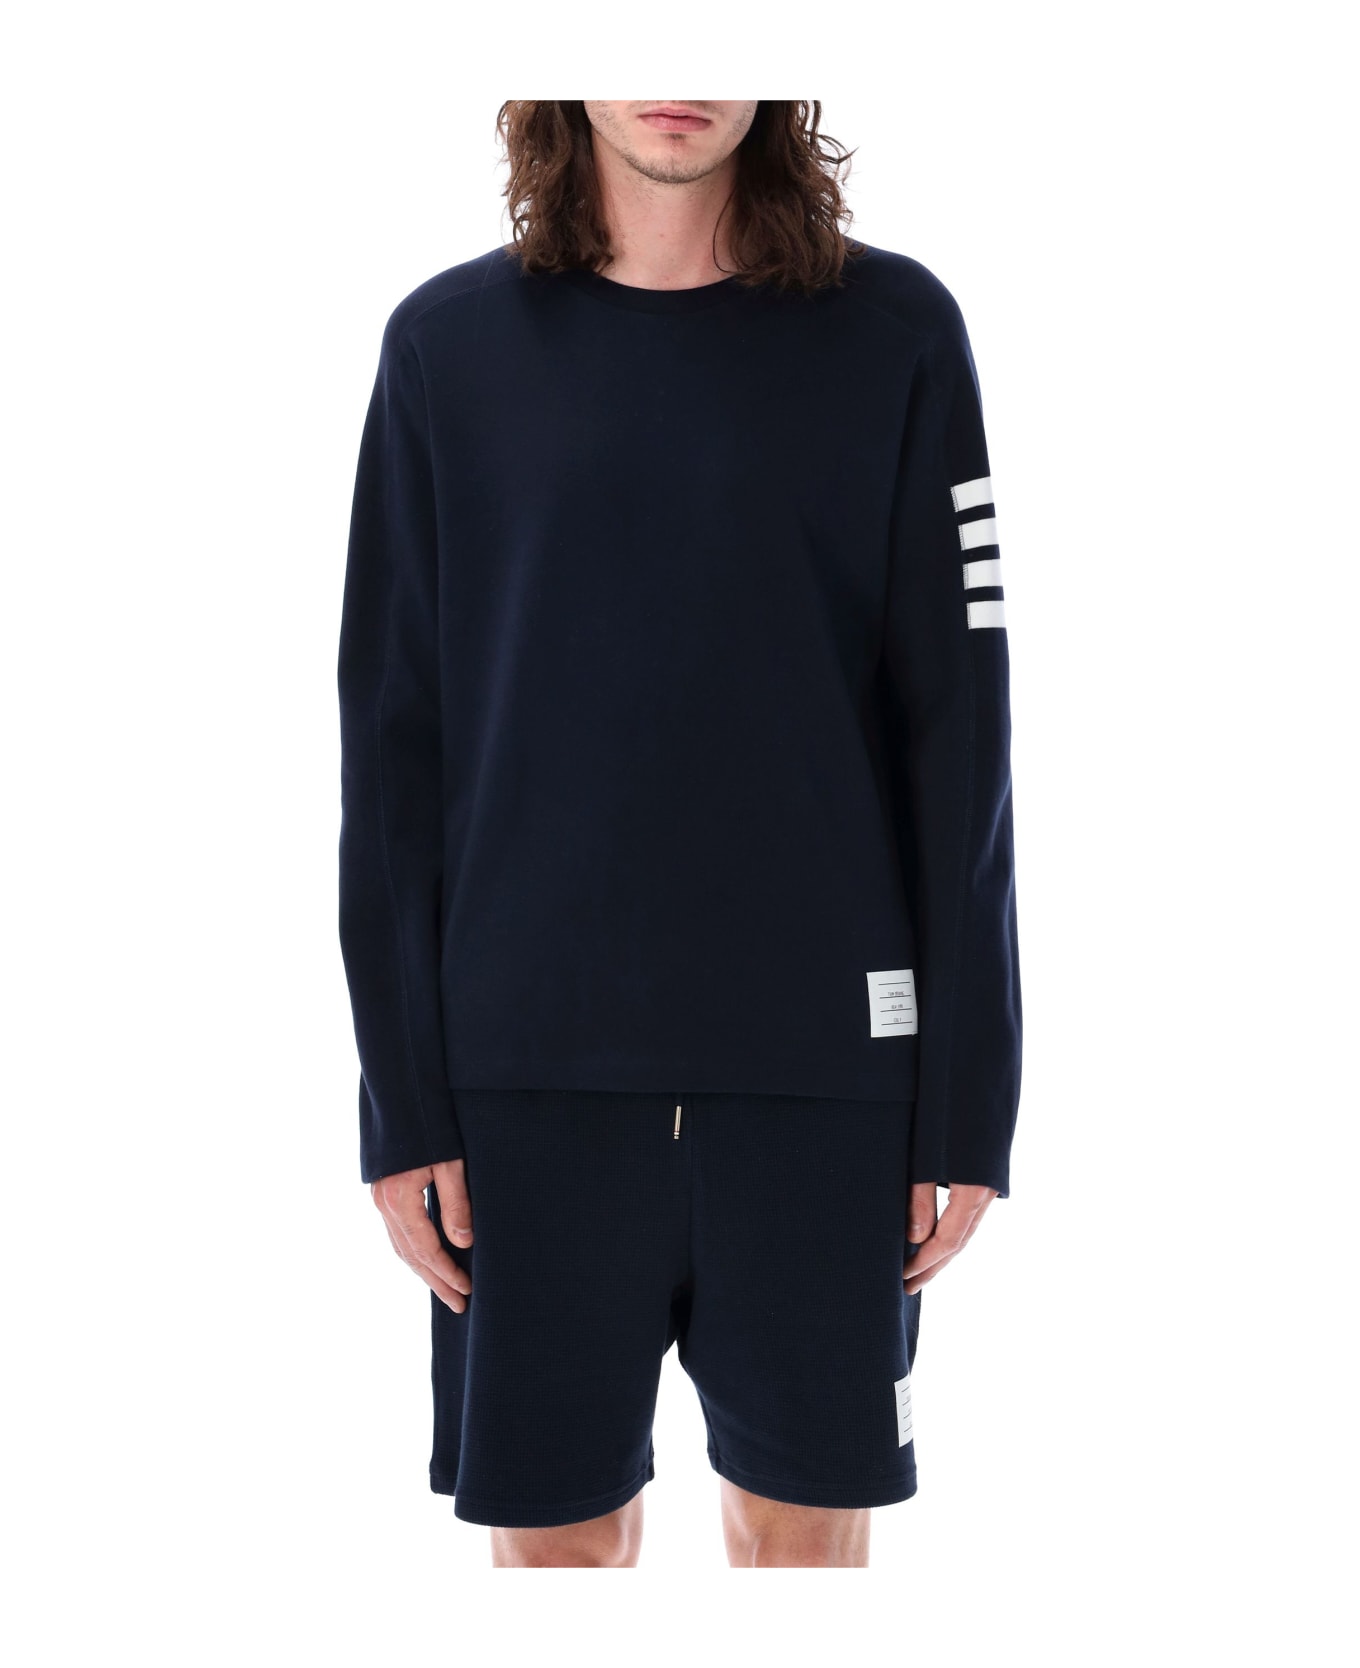 Thom Browne Long Sleeves T-shirt With 4 Bar Stripes - NAVY